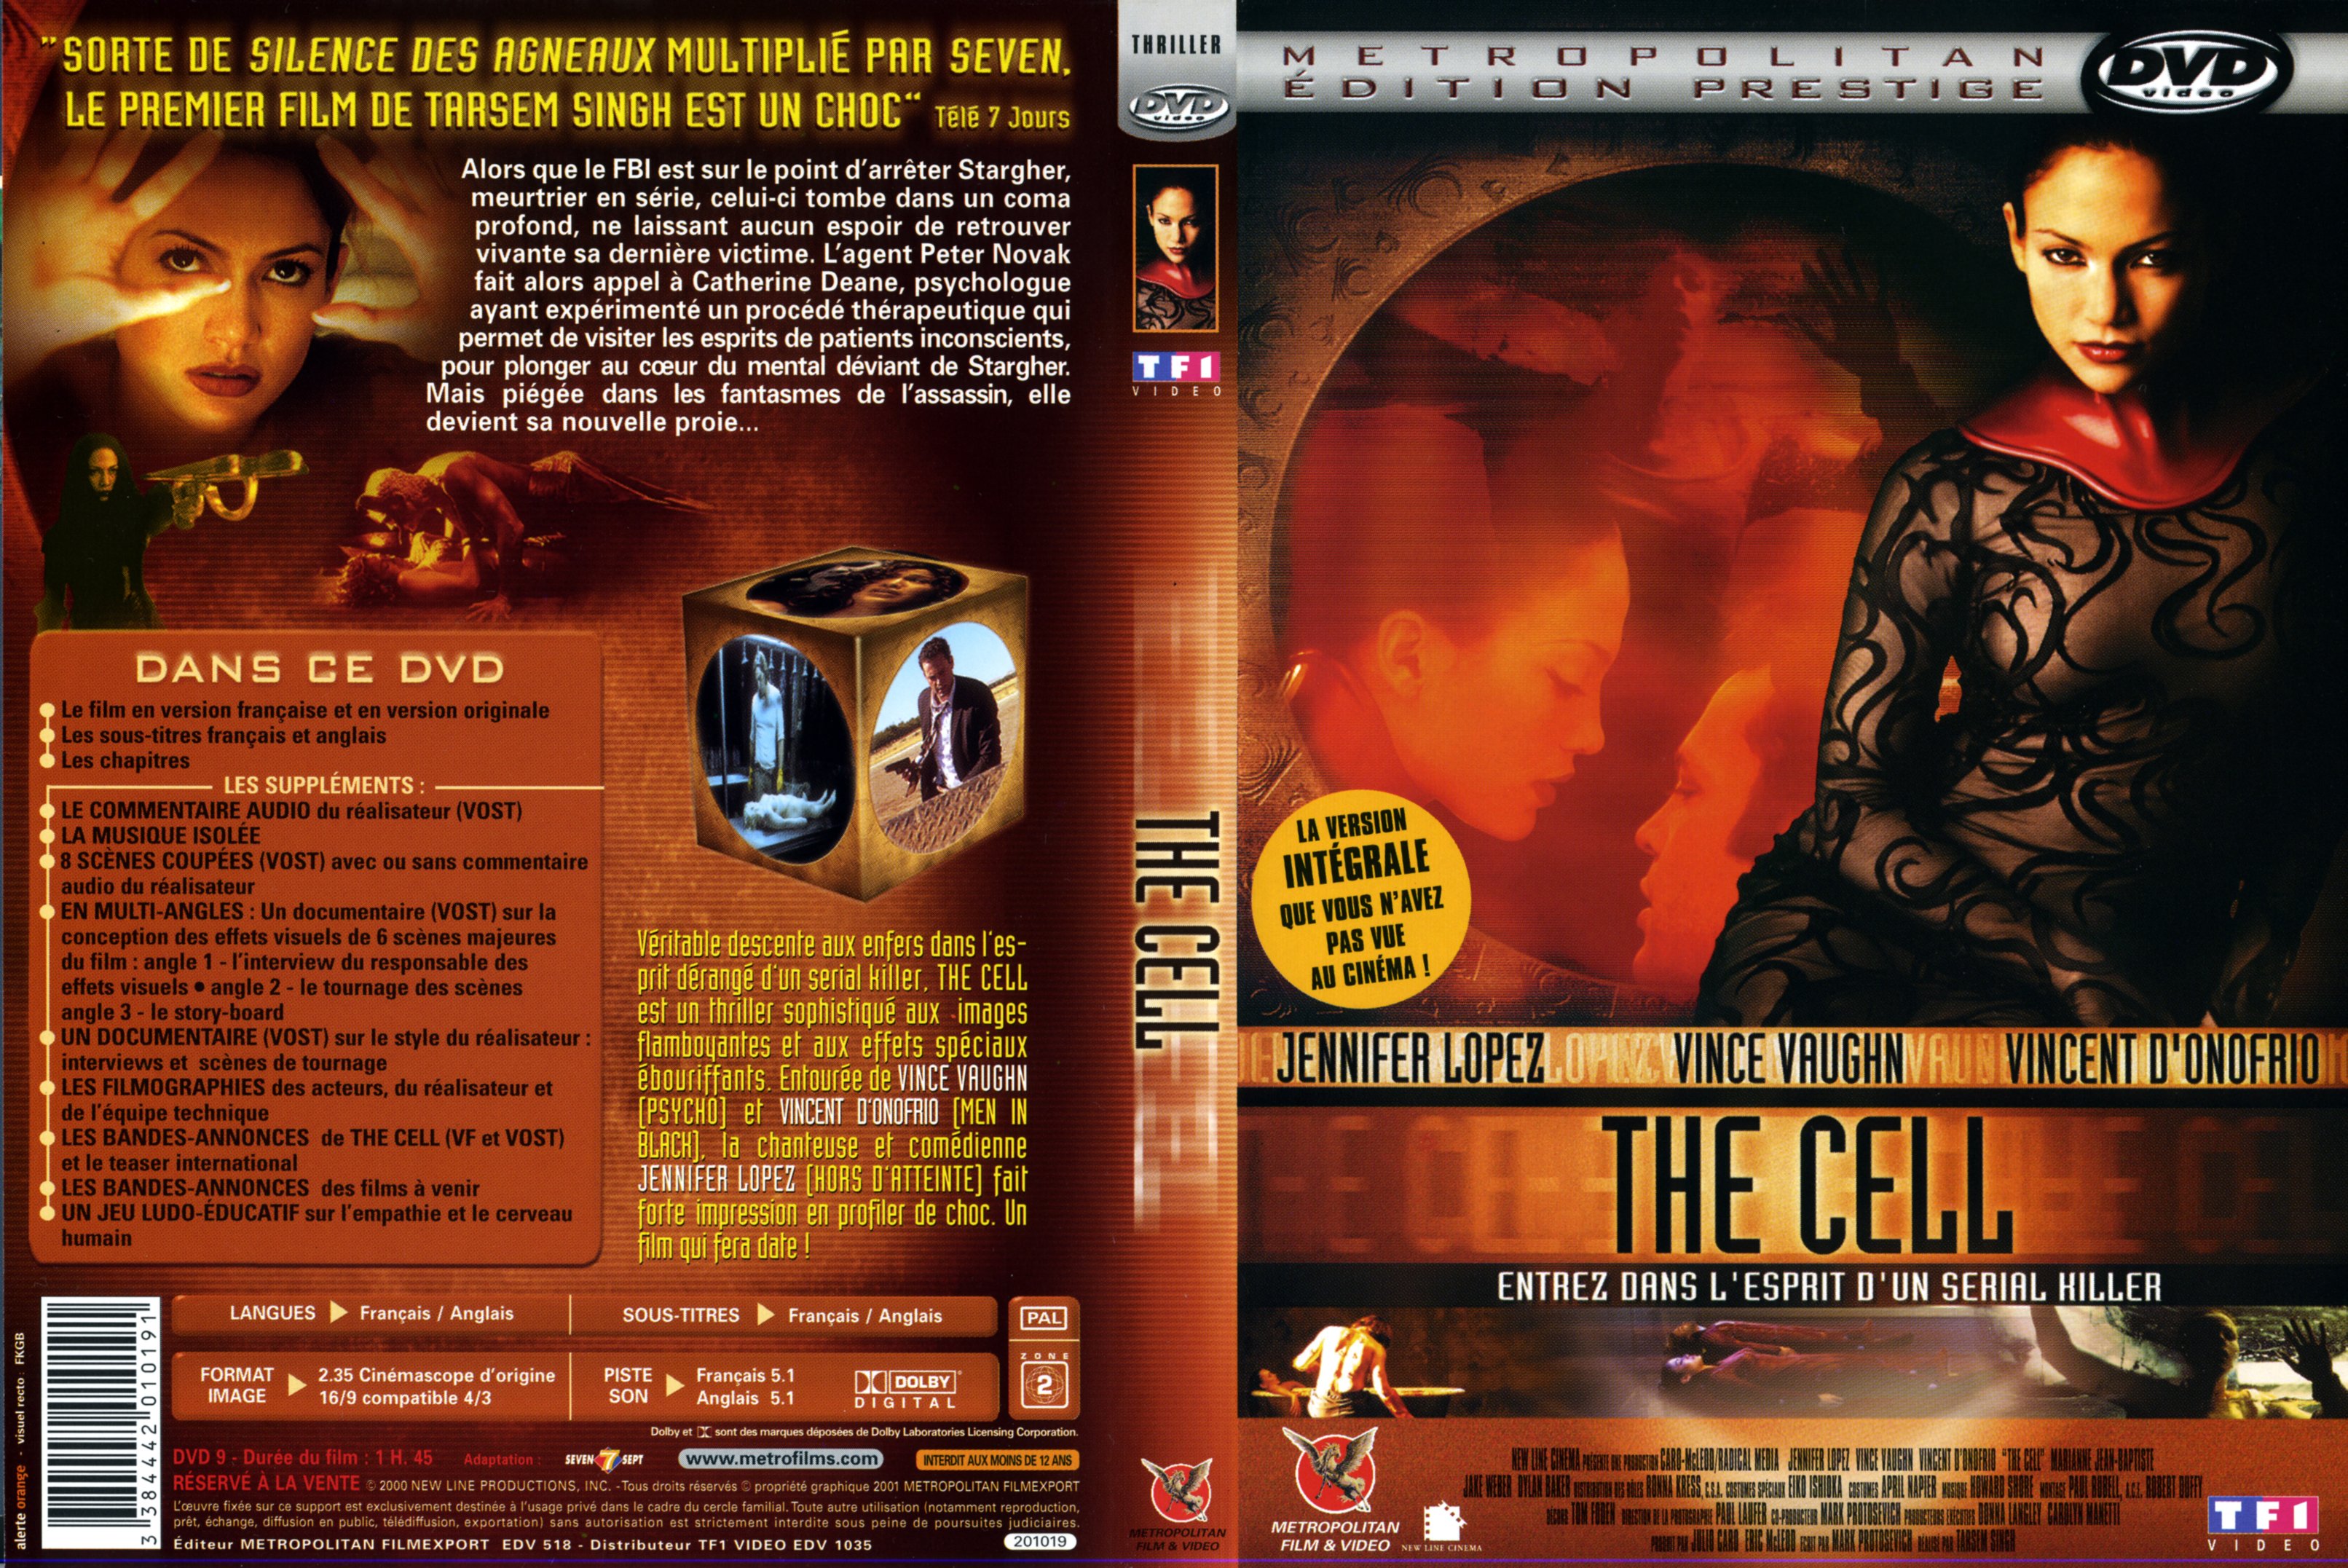 Jaquette DVD The cell